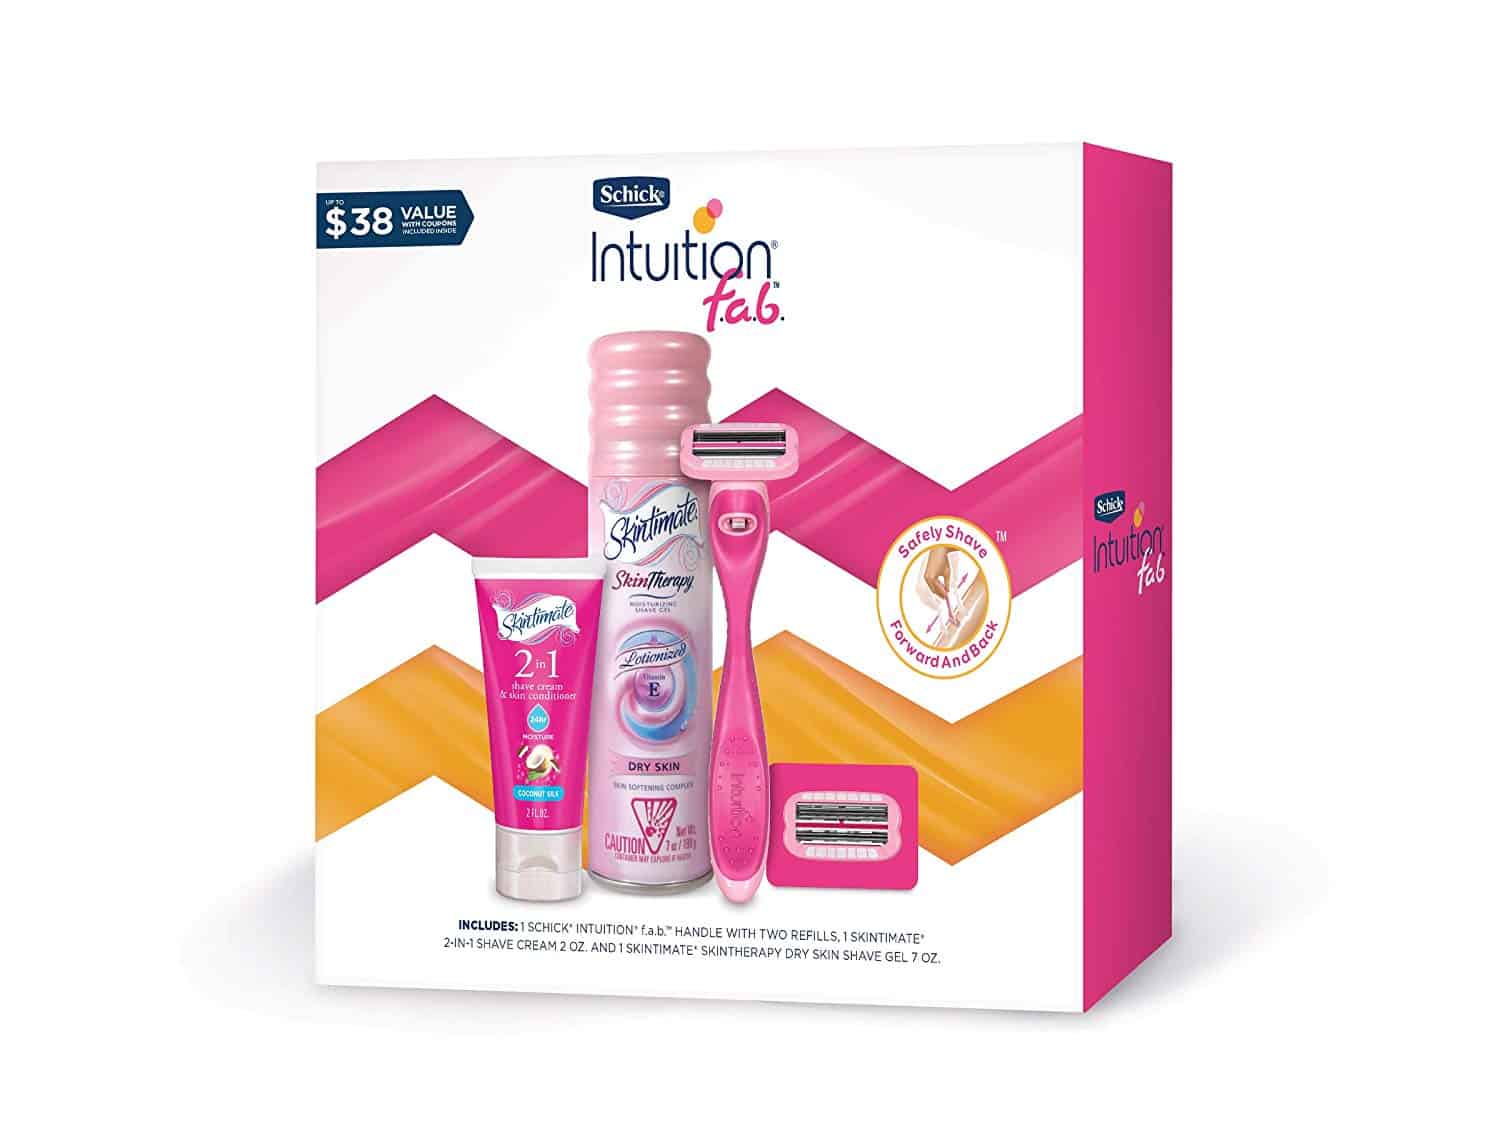 Schick Intuition F.a.b. Razors for Women Gift Set $6.76 Shipped